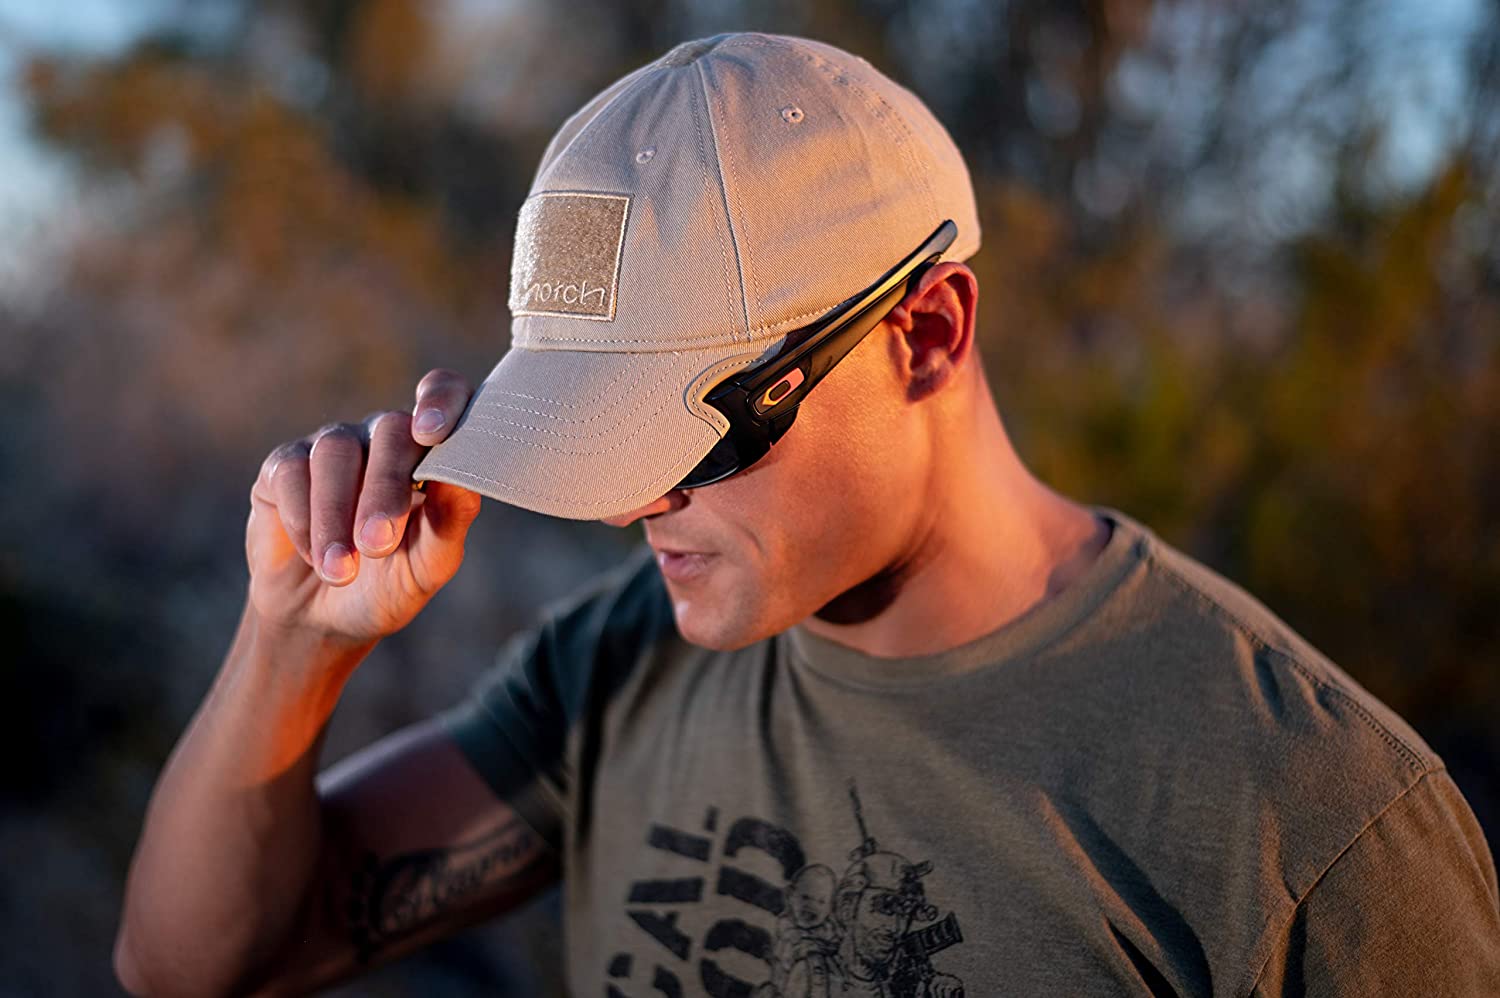 Notch Hats, baseball caps with notches that fit perfectly with just about any style of eyewear.